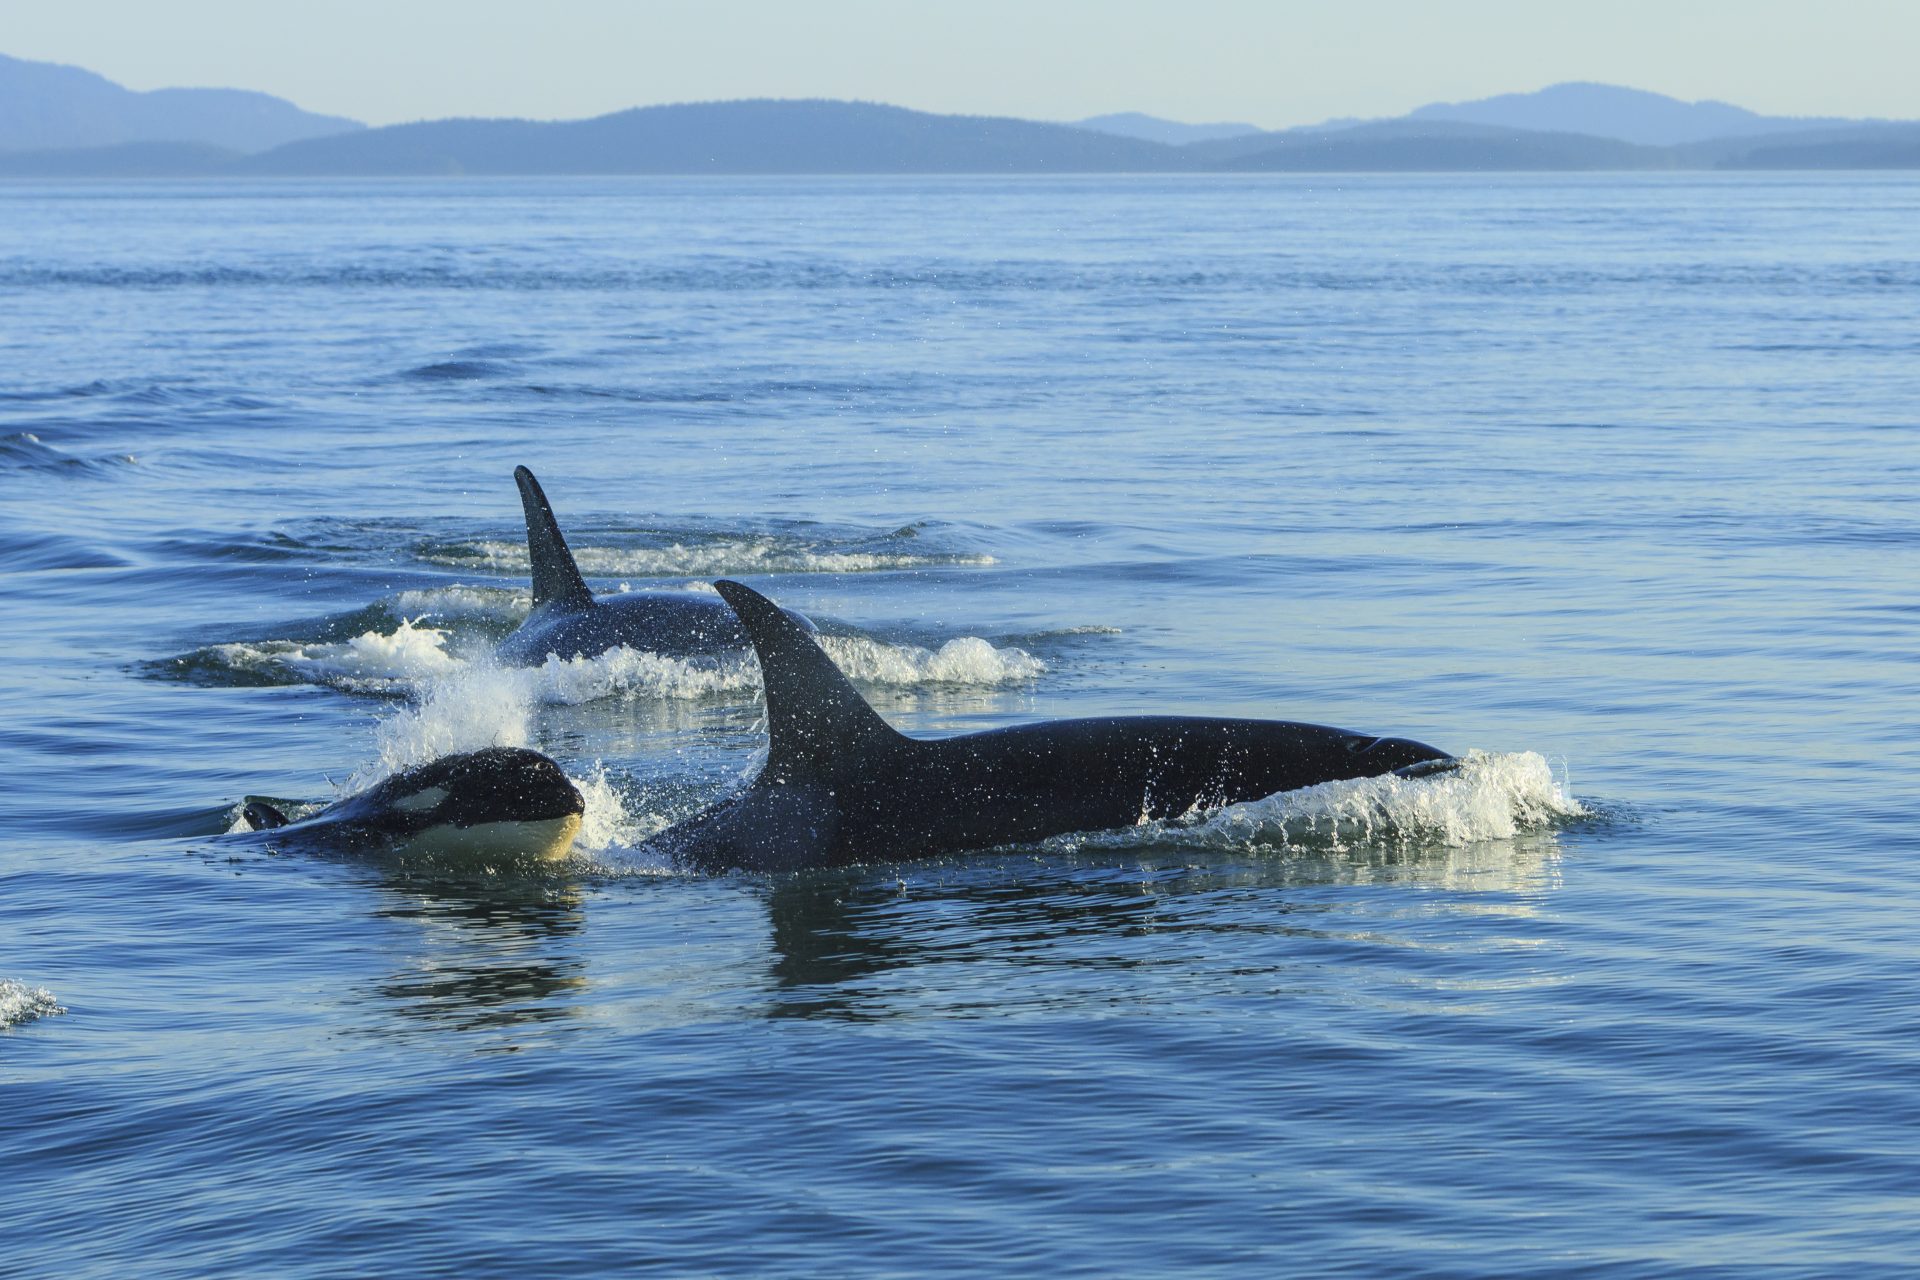 <p>The possible explanations for why, though, aren't as clear-cut as orcas wanting to take down billionaire boats...What is their motive? Who is behind this gang of killer whales?</p>